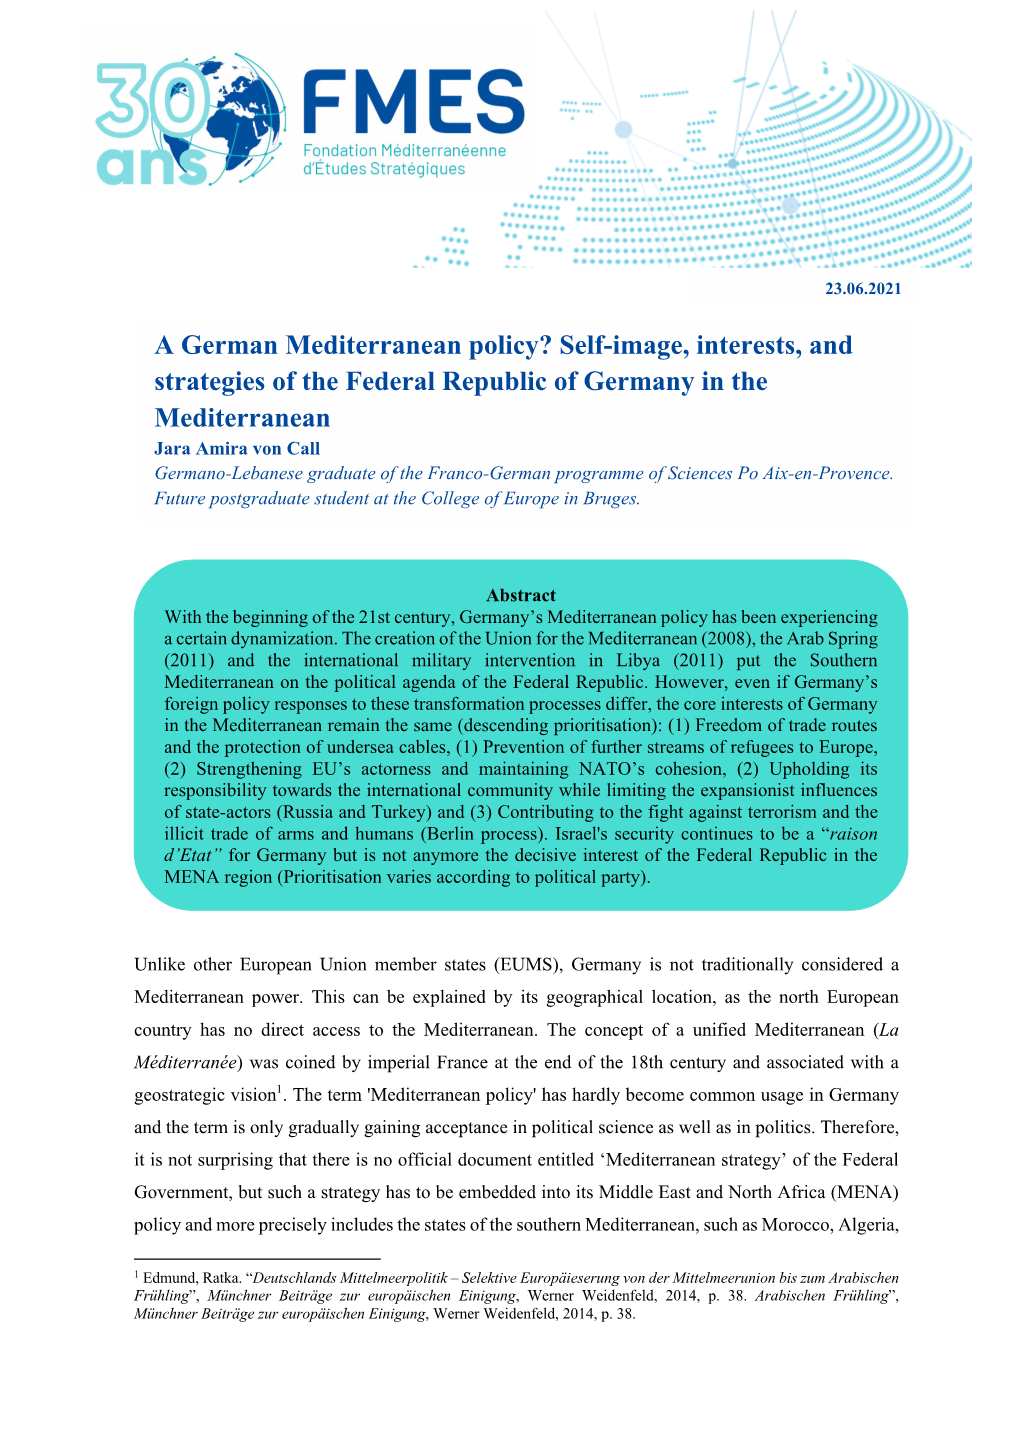 A German Mediterranean Policy? Self-Image, Interests, and Strategies